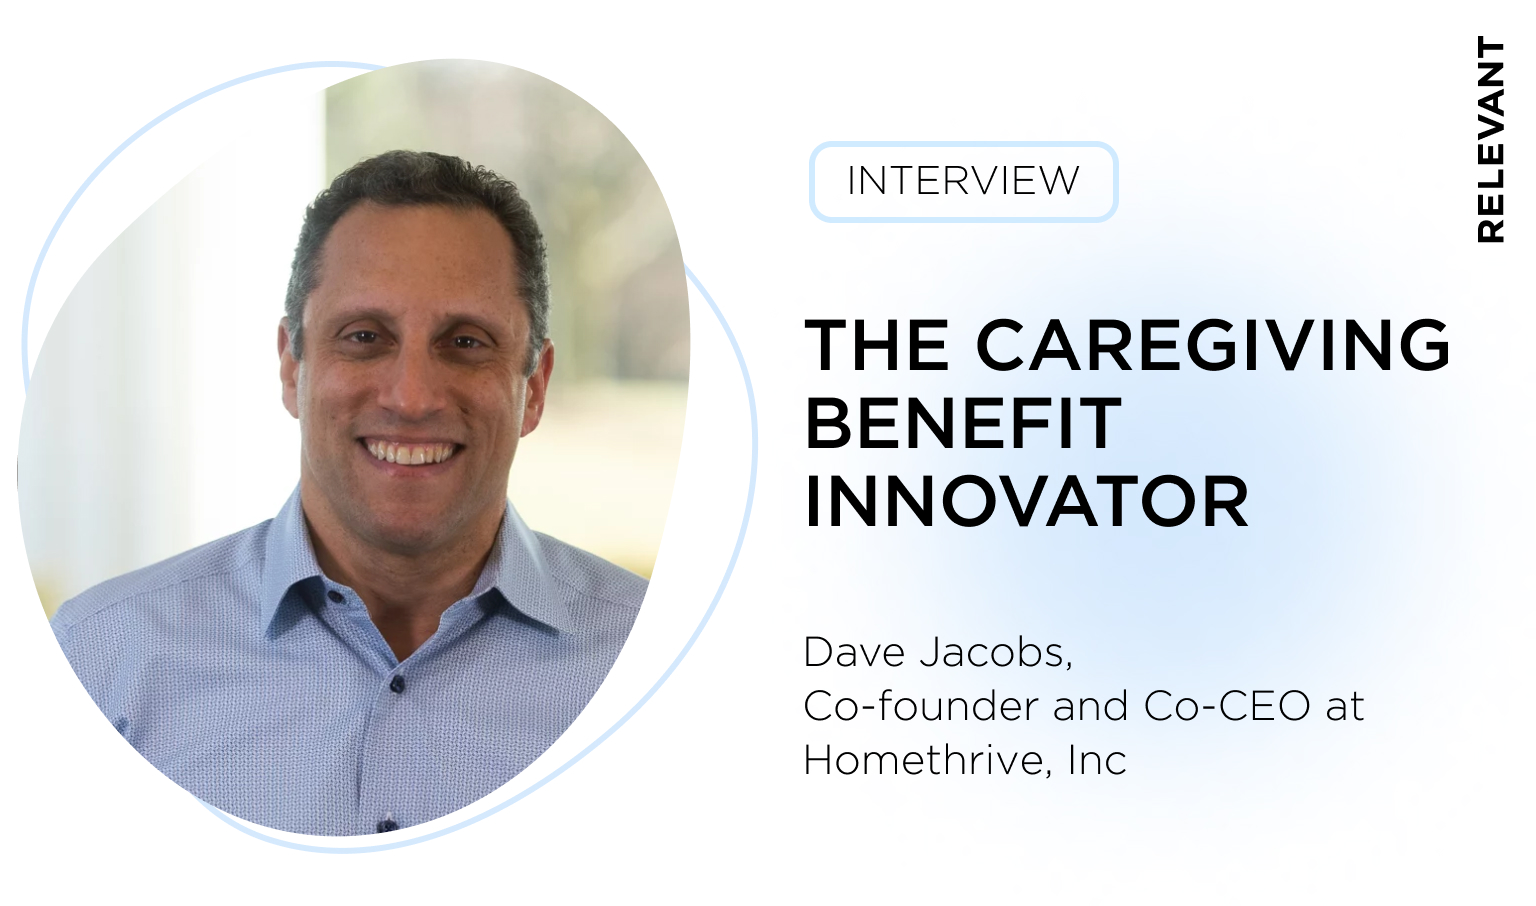 Homethrive – The Caregiving Benefit Innovator That Revolutionised Support for Family Caregivers